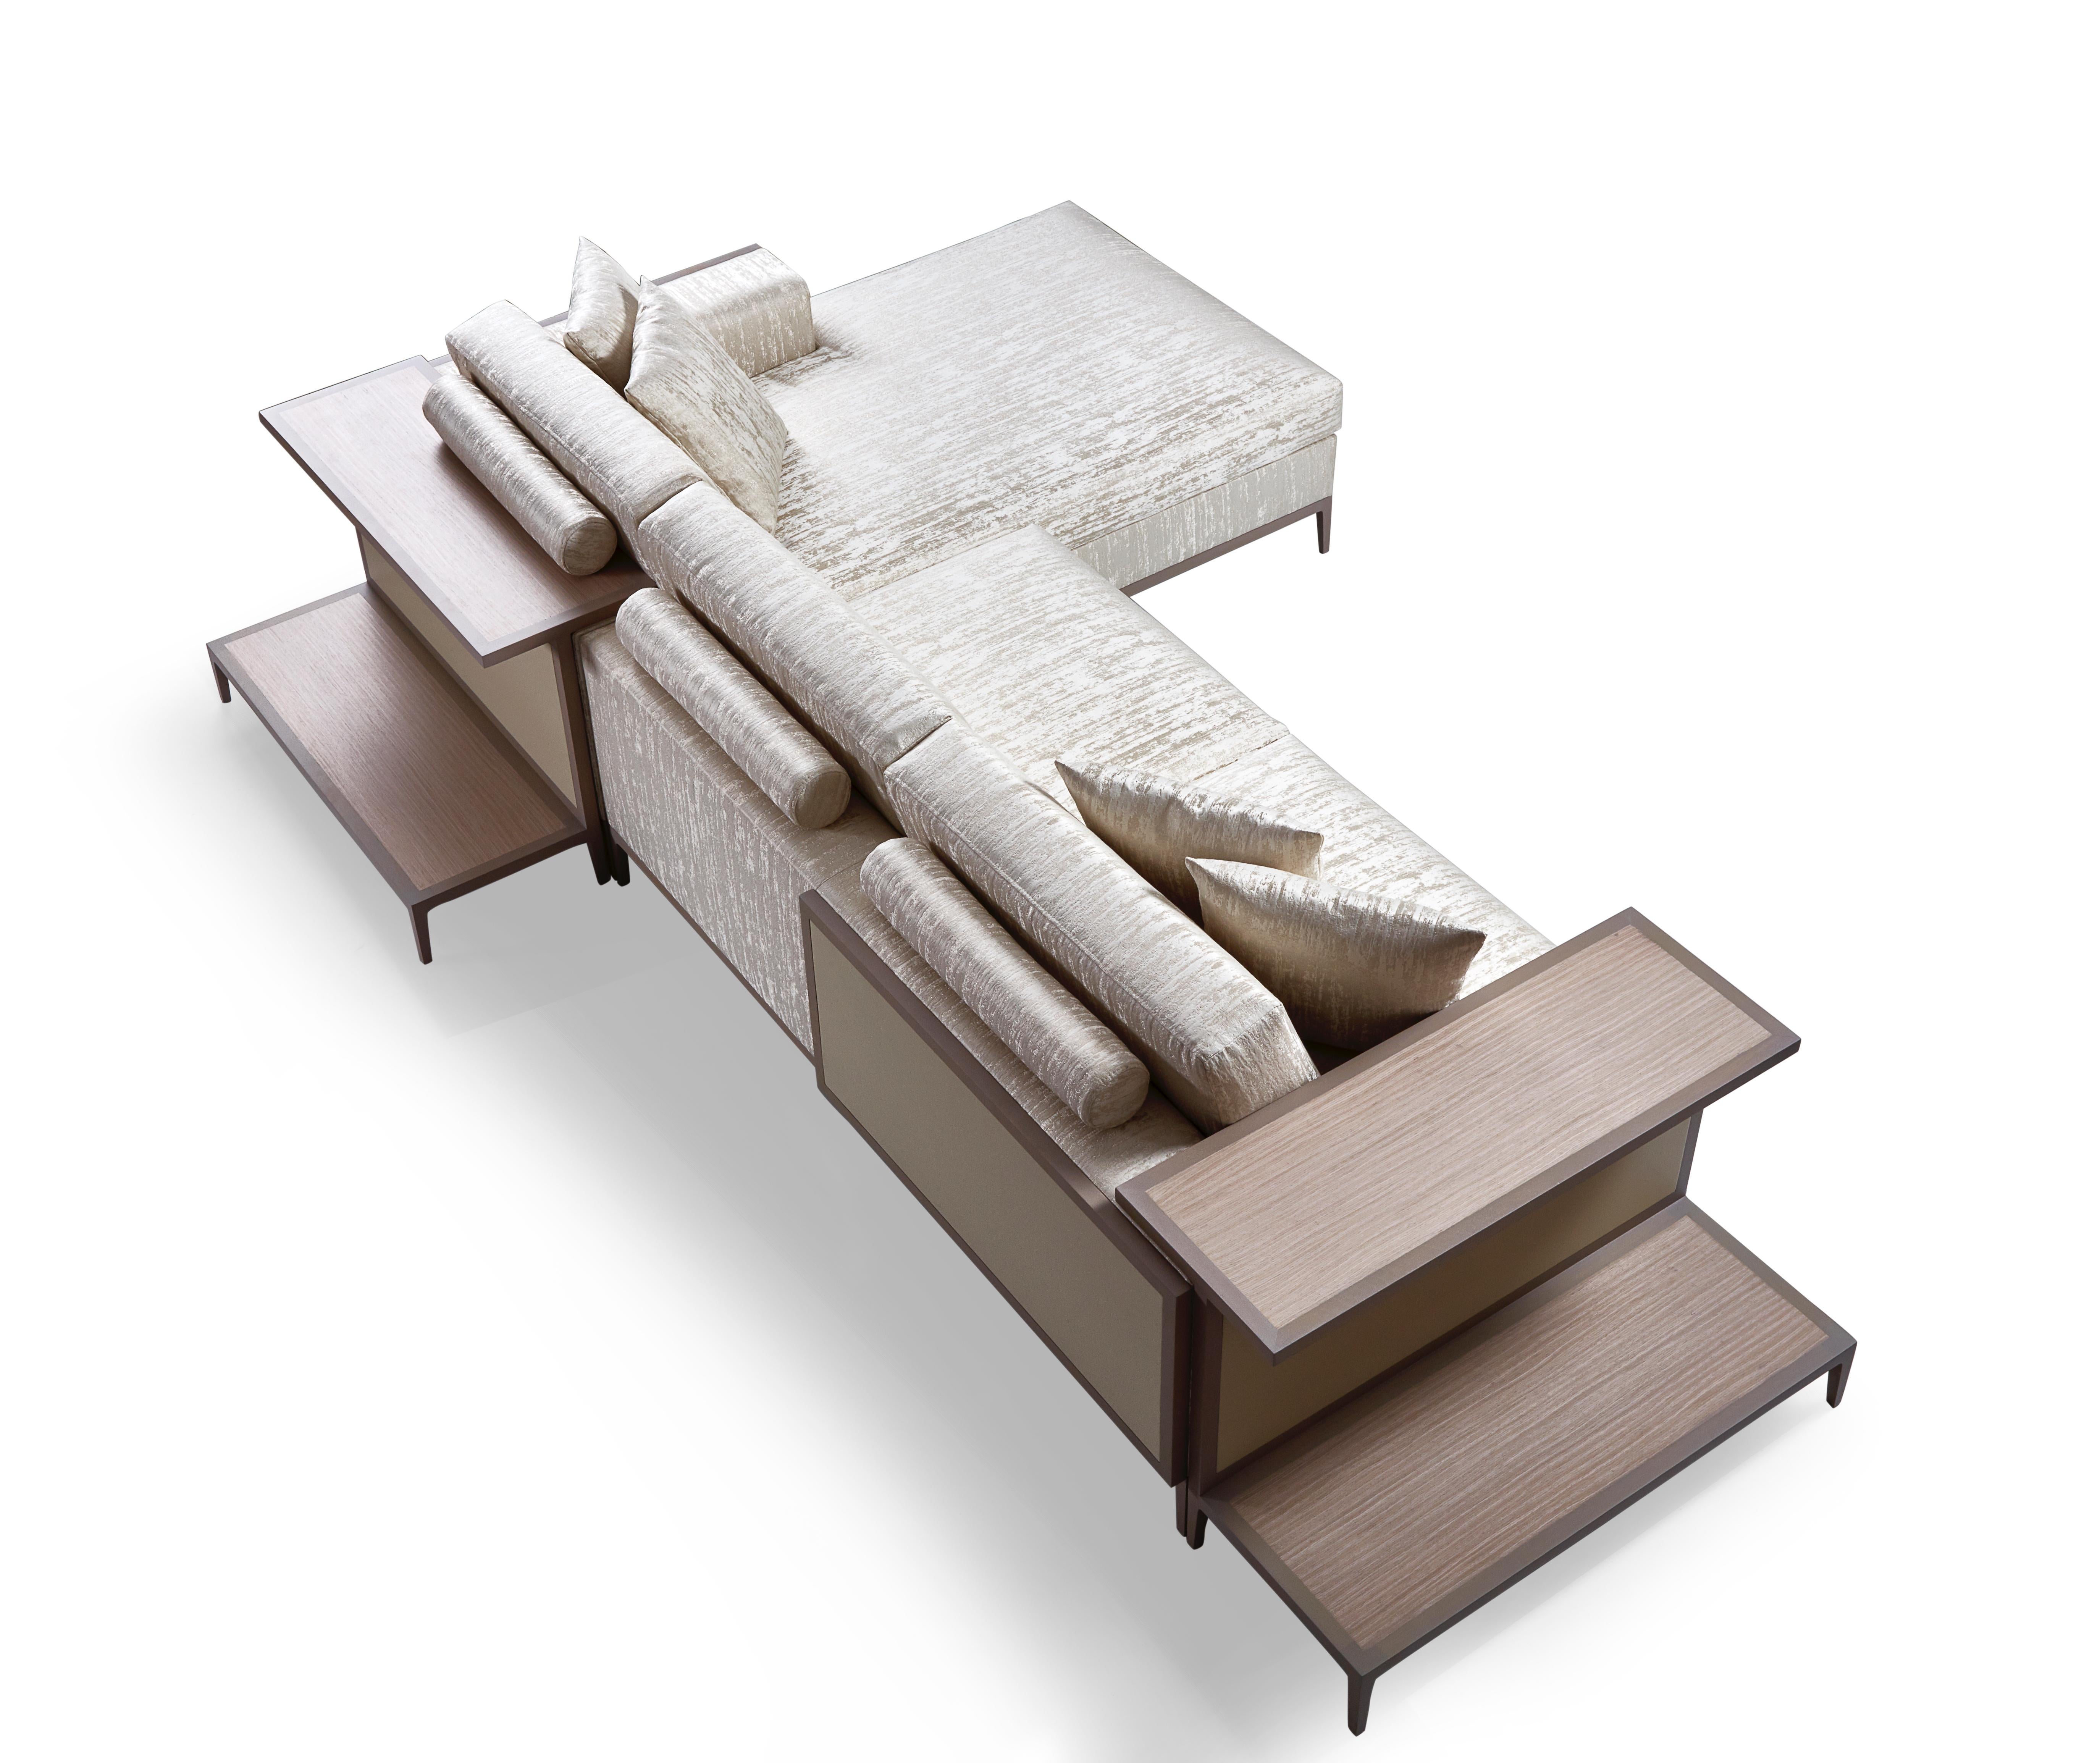 Highly functional style that is handsome from every angle, this sofa was designed to float in a room. A back shelf for a table lamp and books, and a side table for drinks make this piece a centerpiece for entertaining or family lounging.